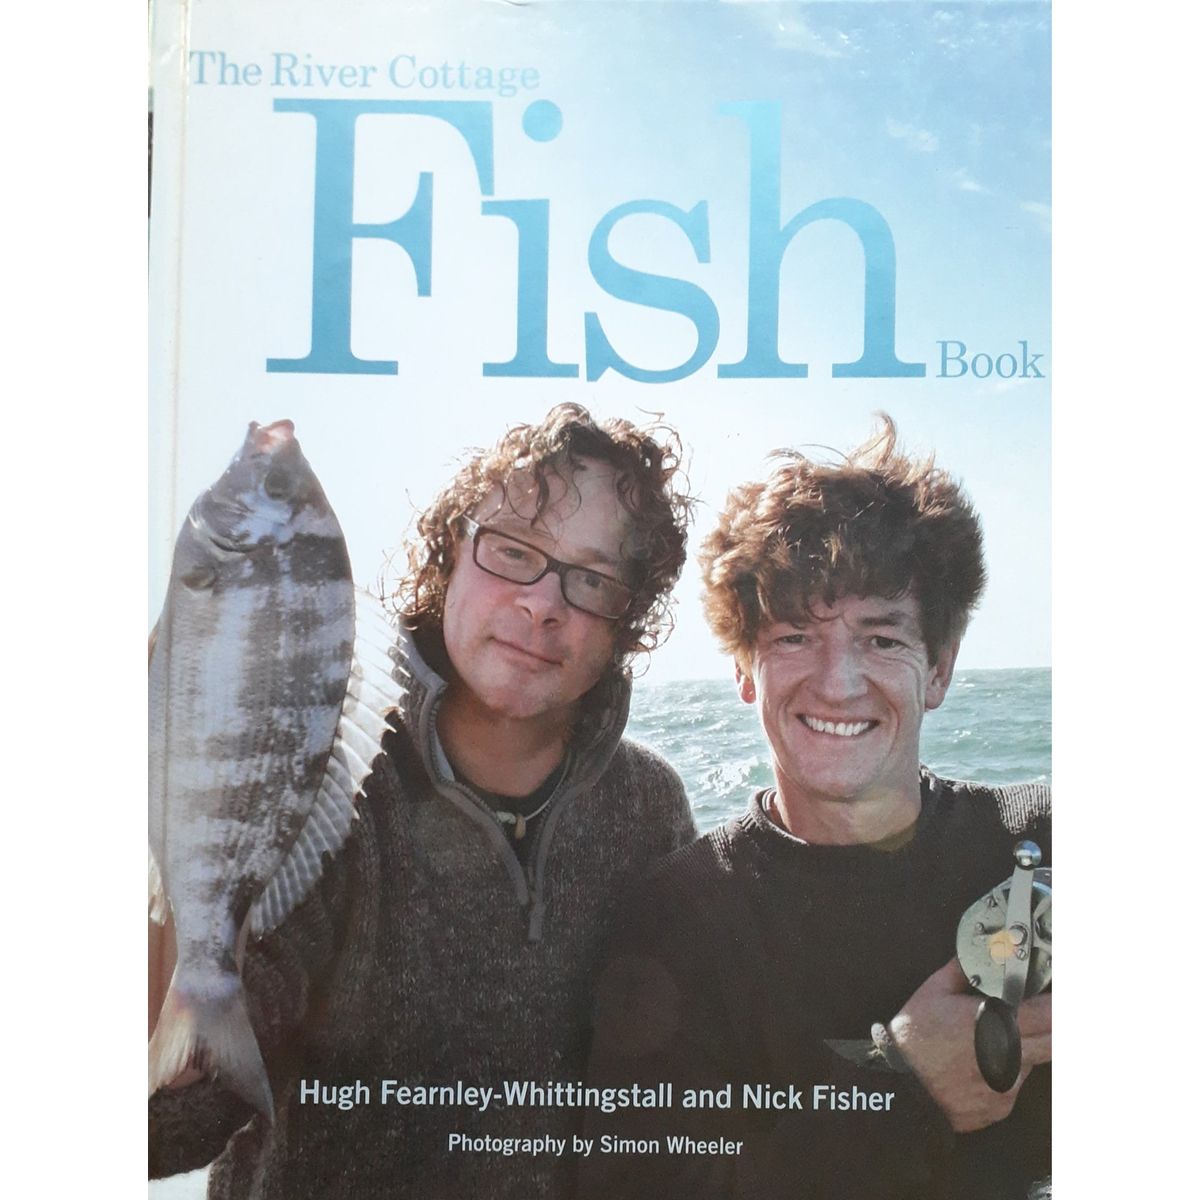 ISBN: 9780747588696 / 0747588694 - The River Cottage Fish Book by Hugh Fearnley-Whittingstall and Nick Fisher [2007]